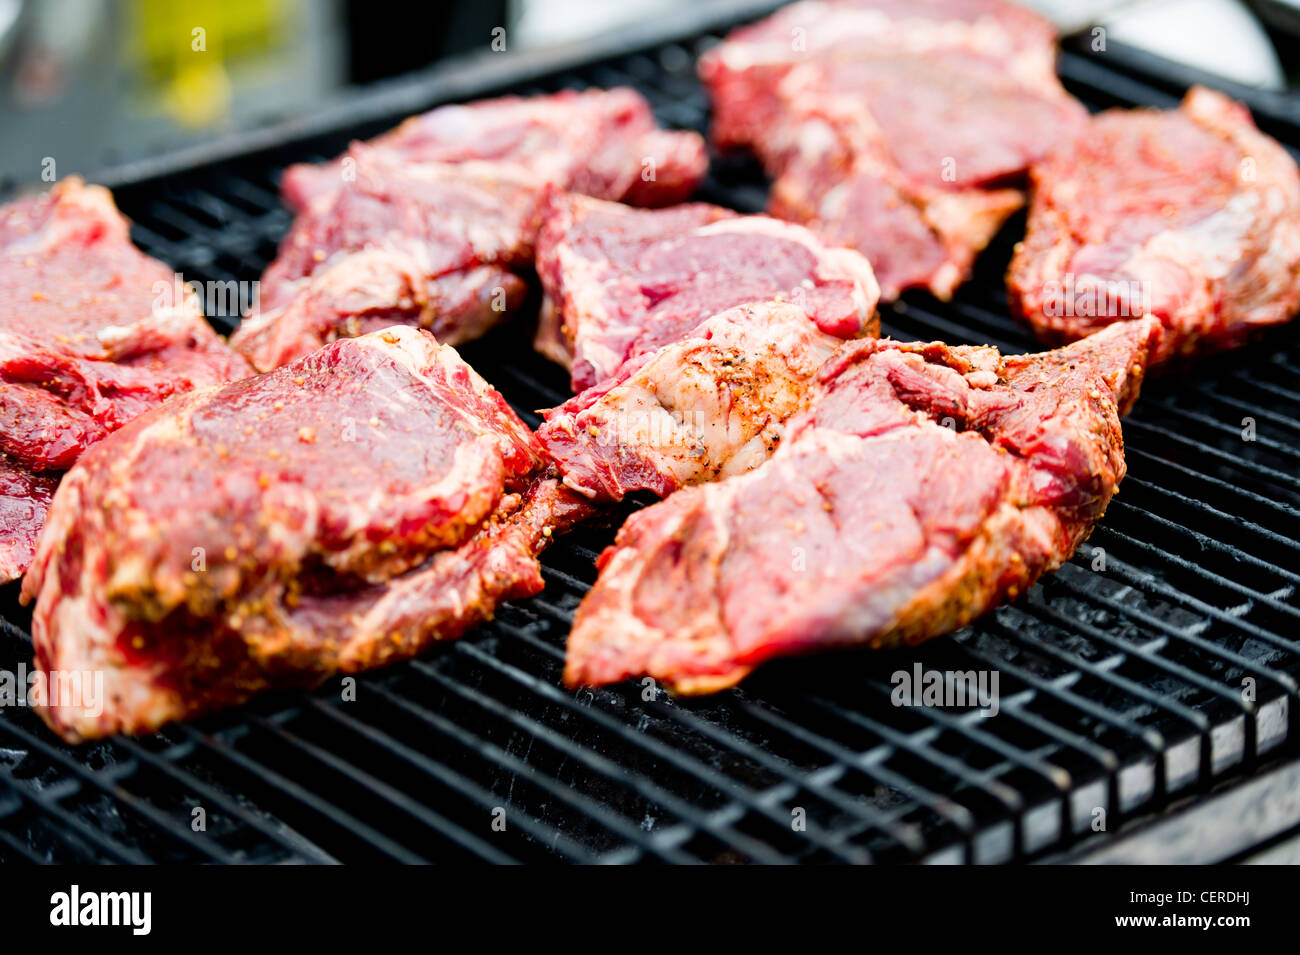 Seasoned beef cooking on the grill Stock Photo